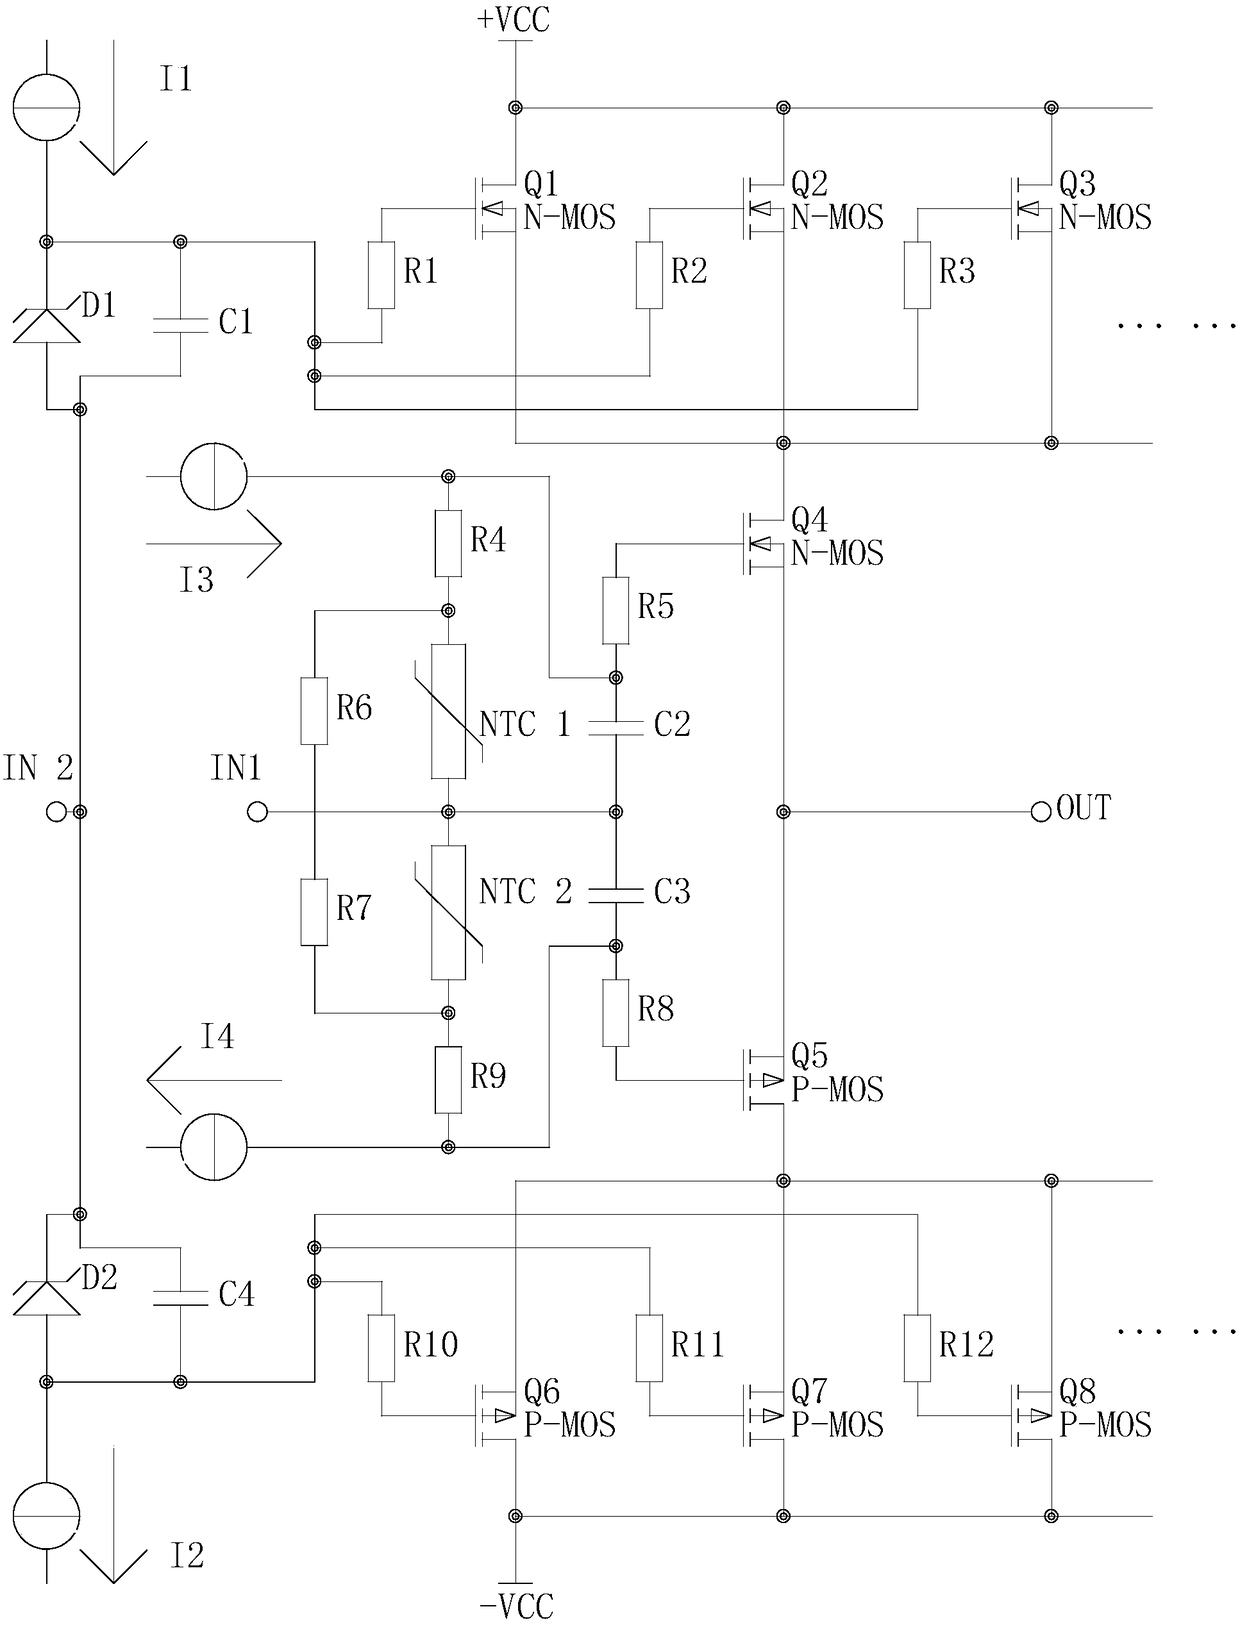 A Complementary Output Circuit of High Power Field Effect Transistor without Source Resistor